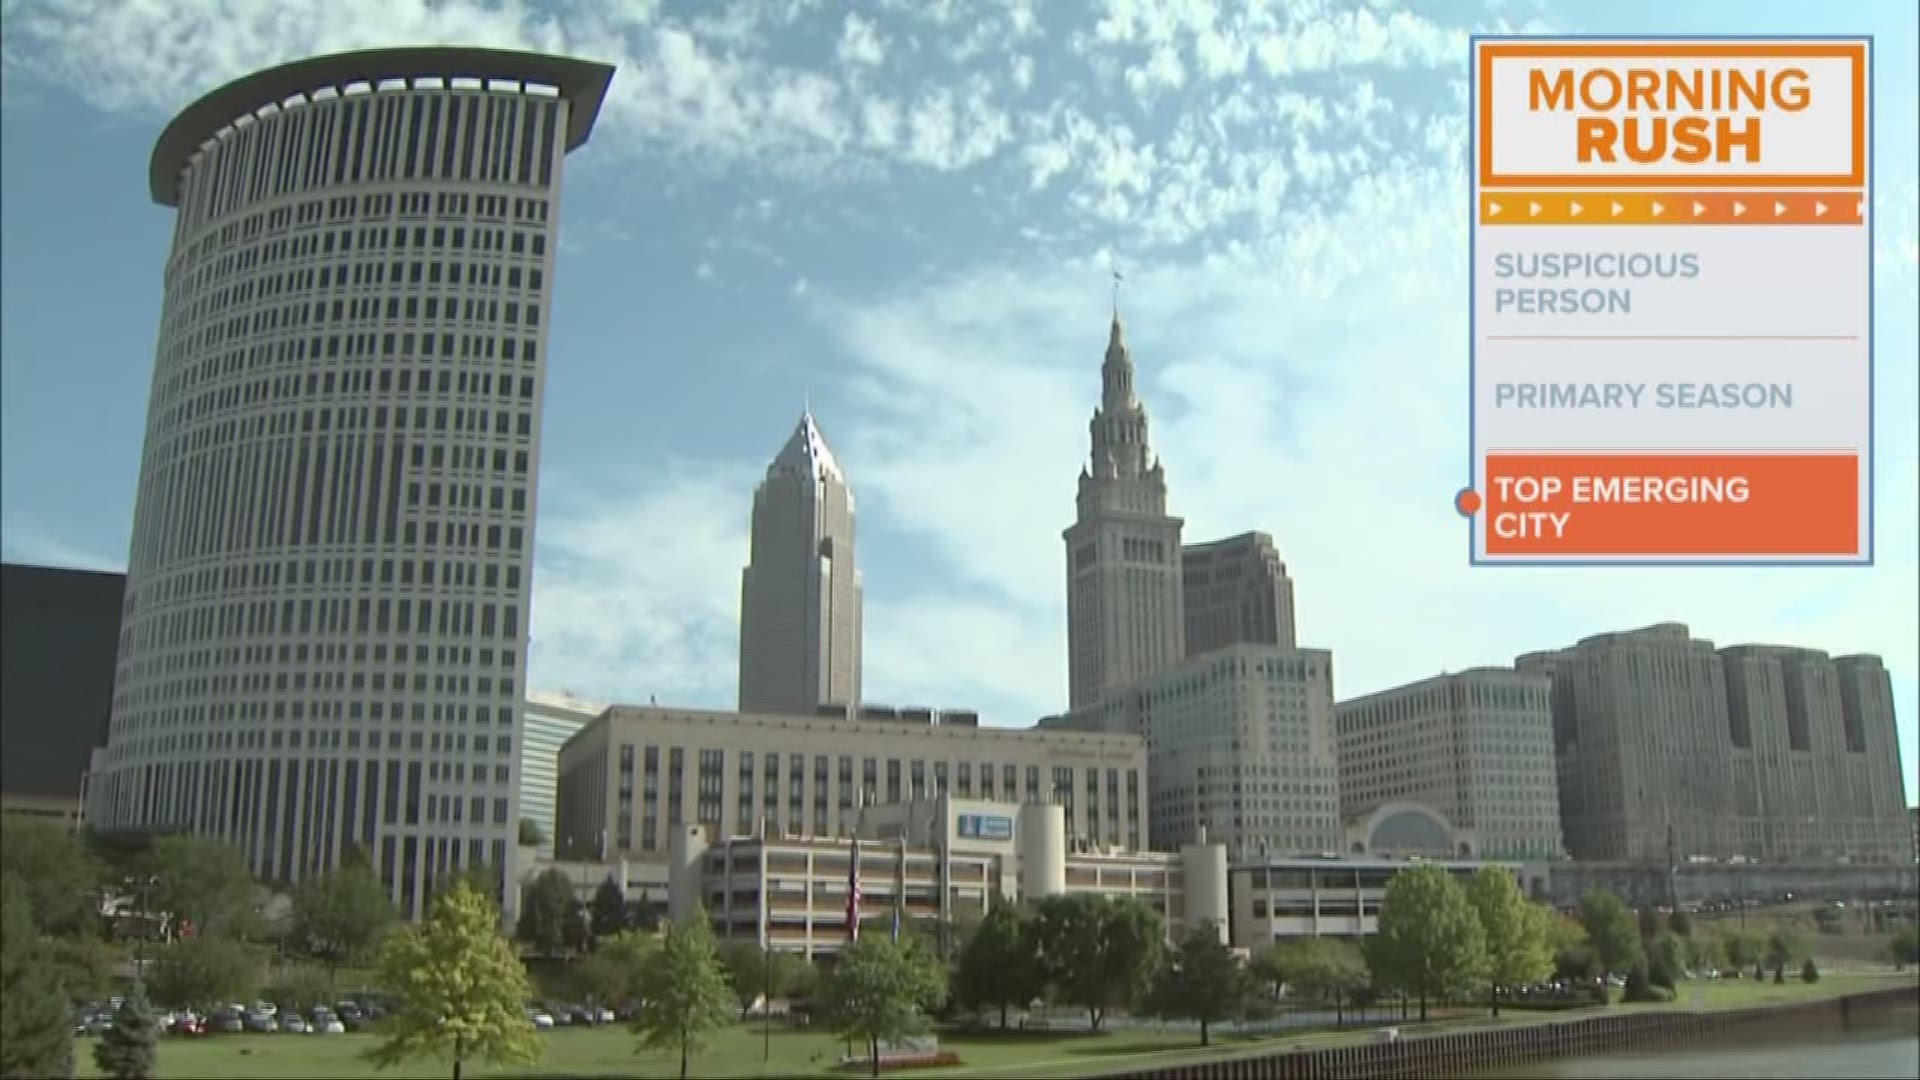 May 7, 2018: Awesome! Priceline.com has recognized Cleveland as one of the country's top 20 emerging cities.